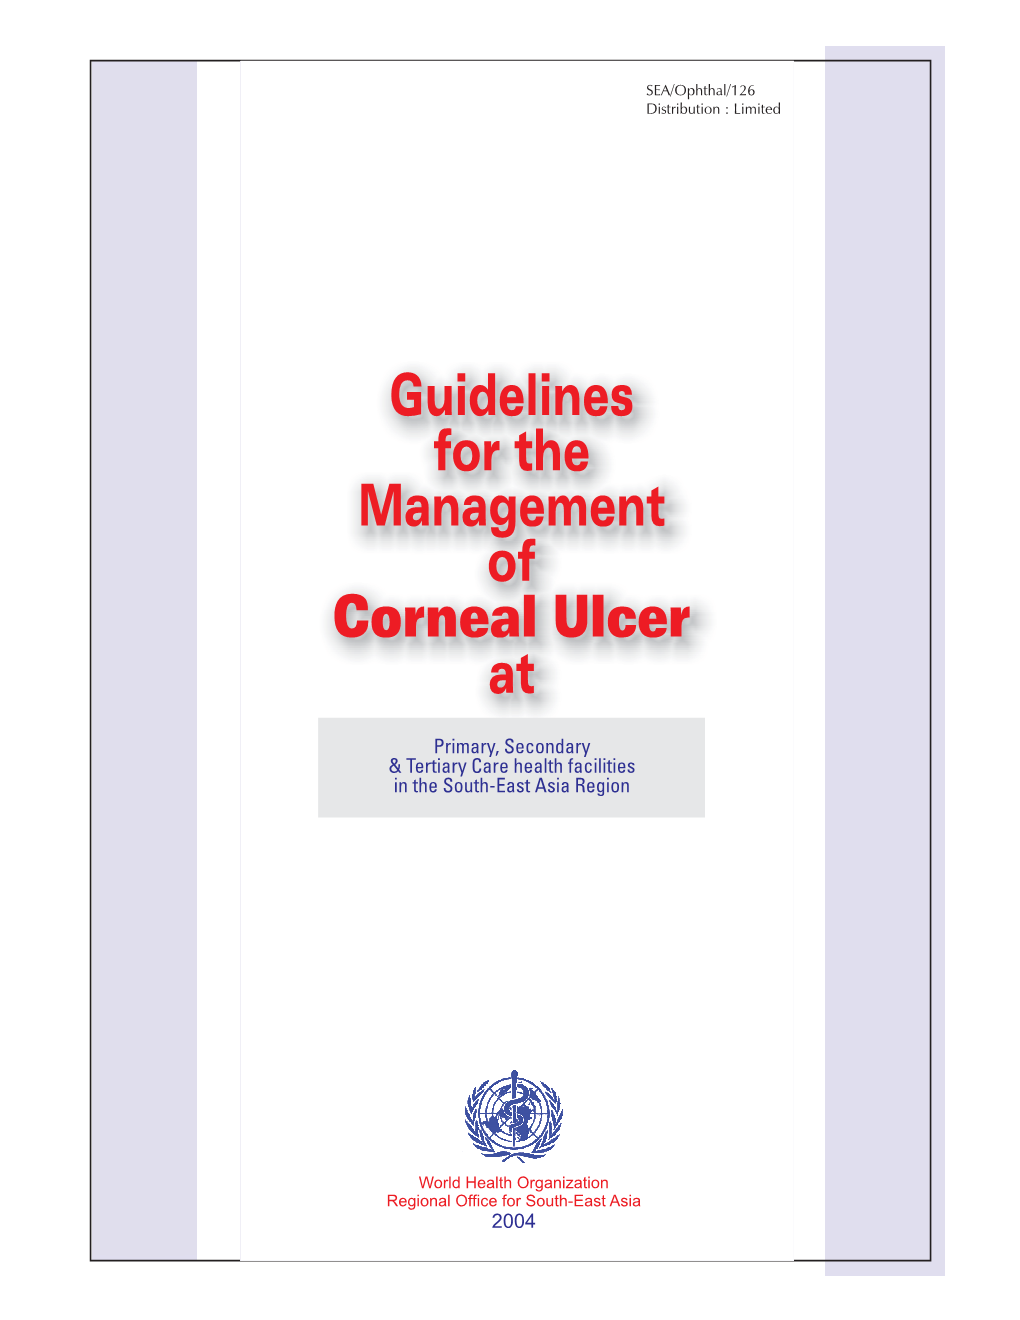 Guidelines for the Management of at Corneal Ulcer